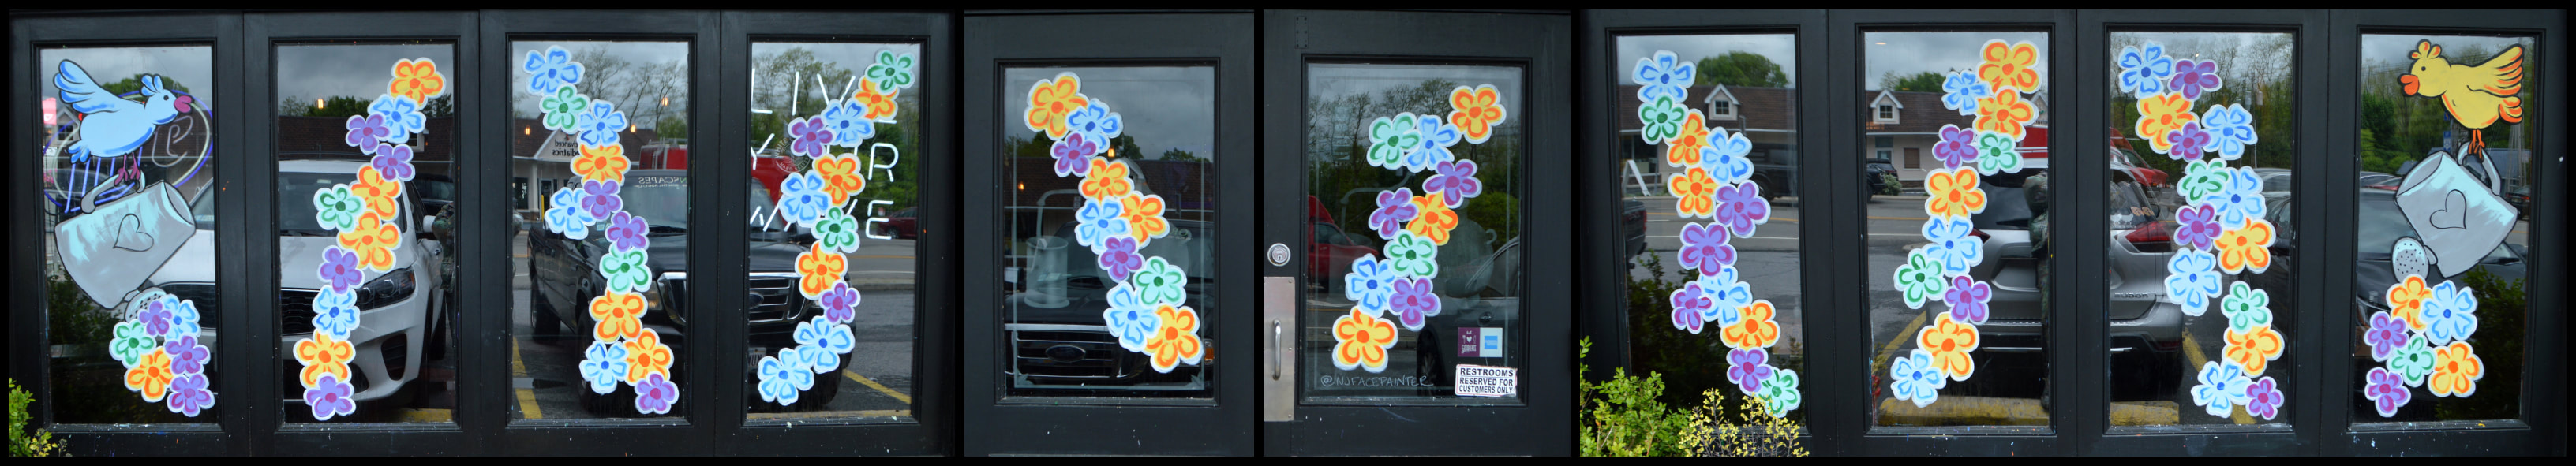 Spring Window Art at The Copper Still in Pomona, Rockland County, NY